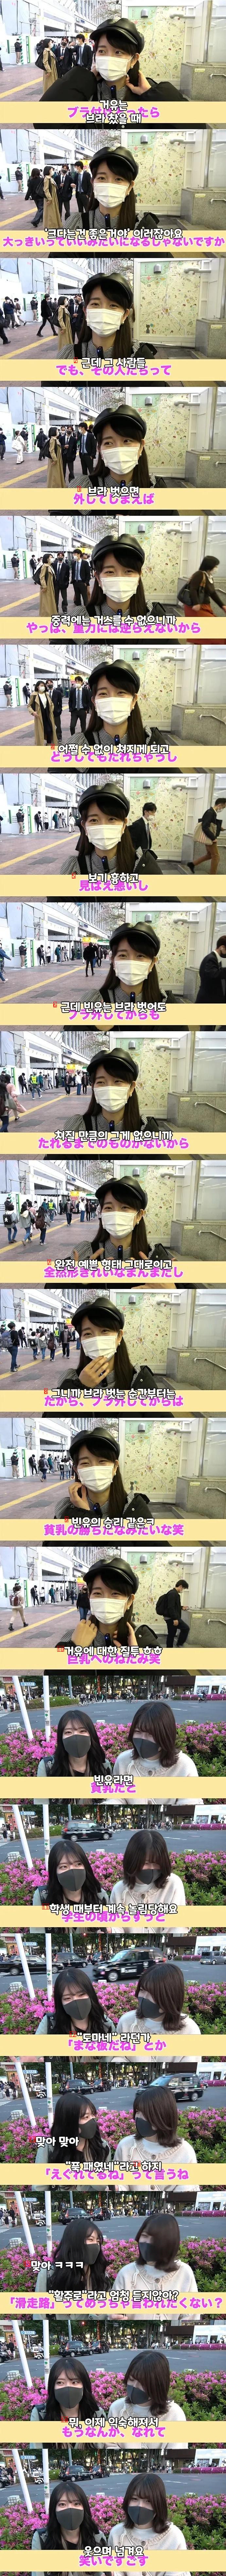 Japanese women's thoughts on the oil supply and oil supply